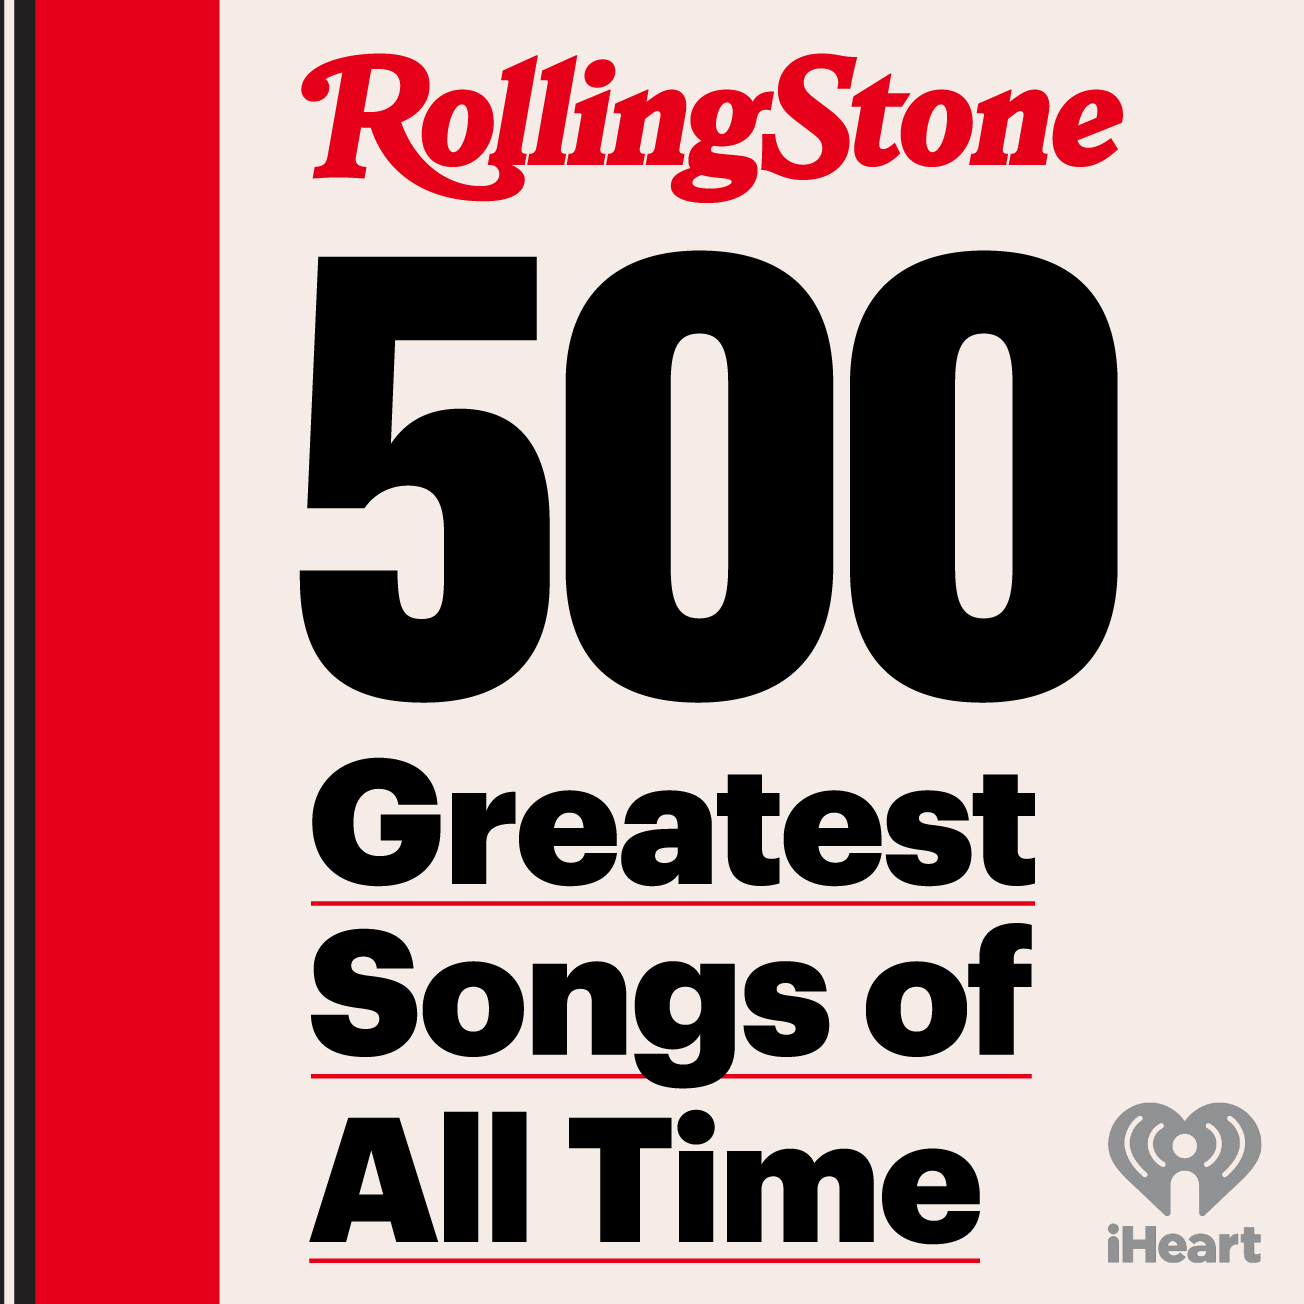 Introducing: Rolling Stone's 500 Greatest Songs